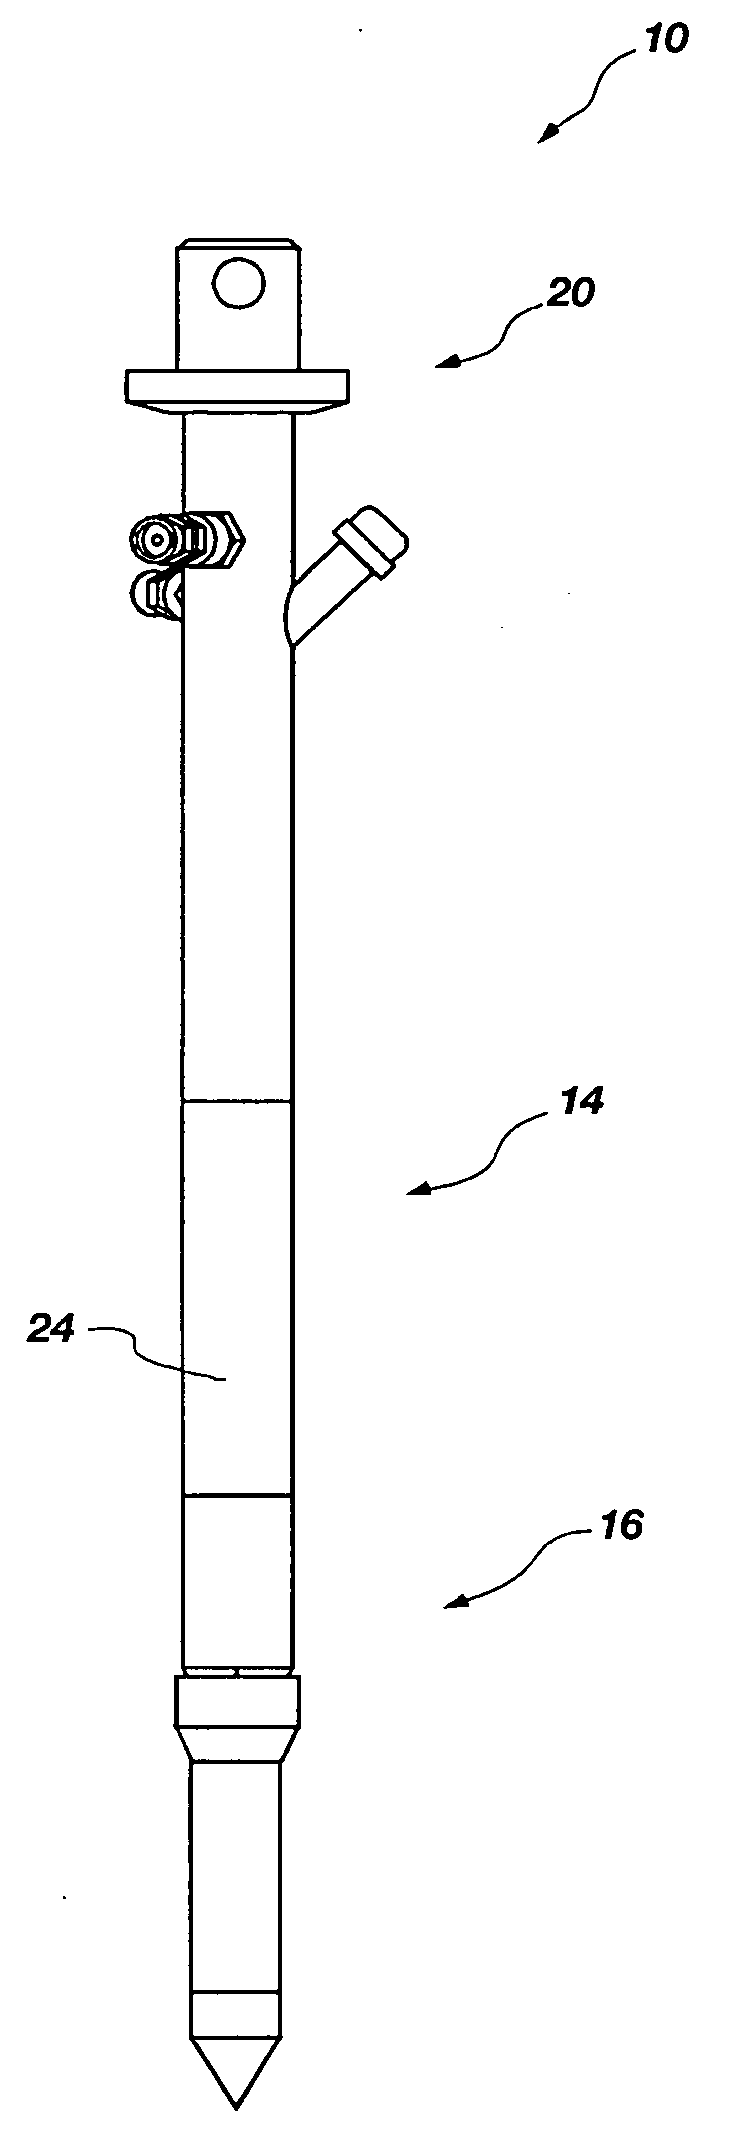 Apparatuses for interaction with a subterranean formation, and methods of use thereof